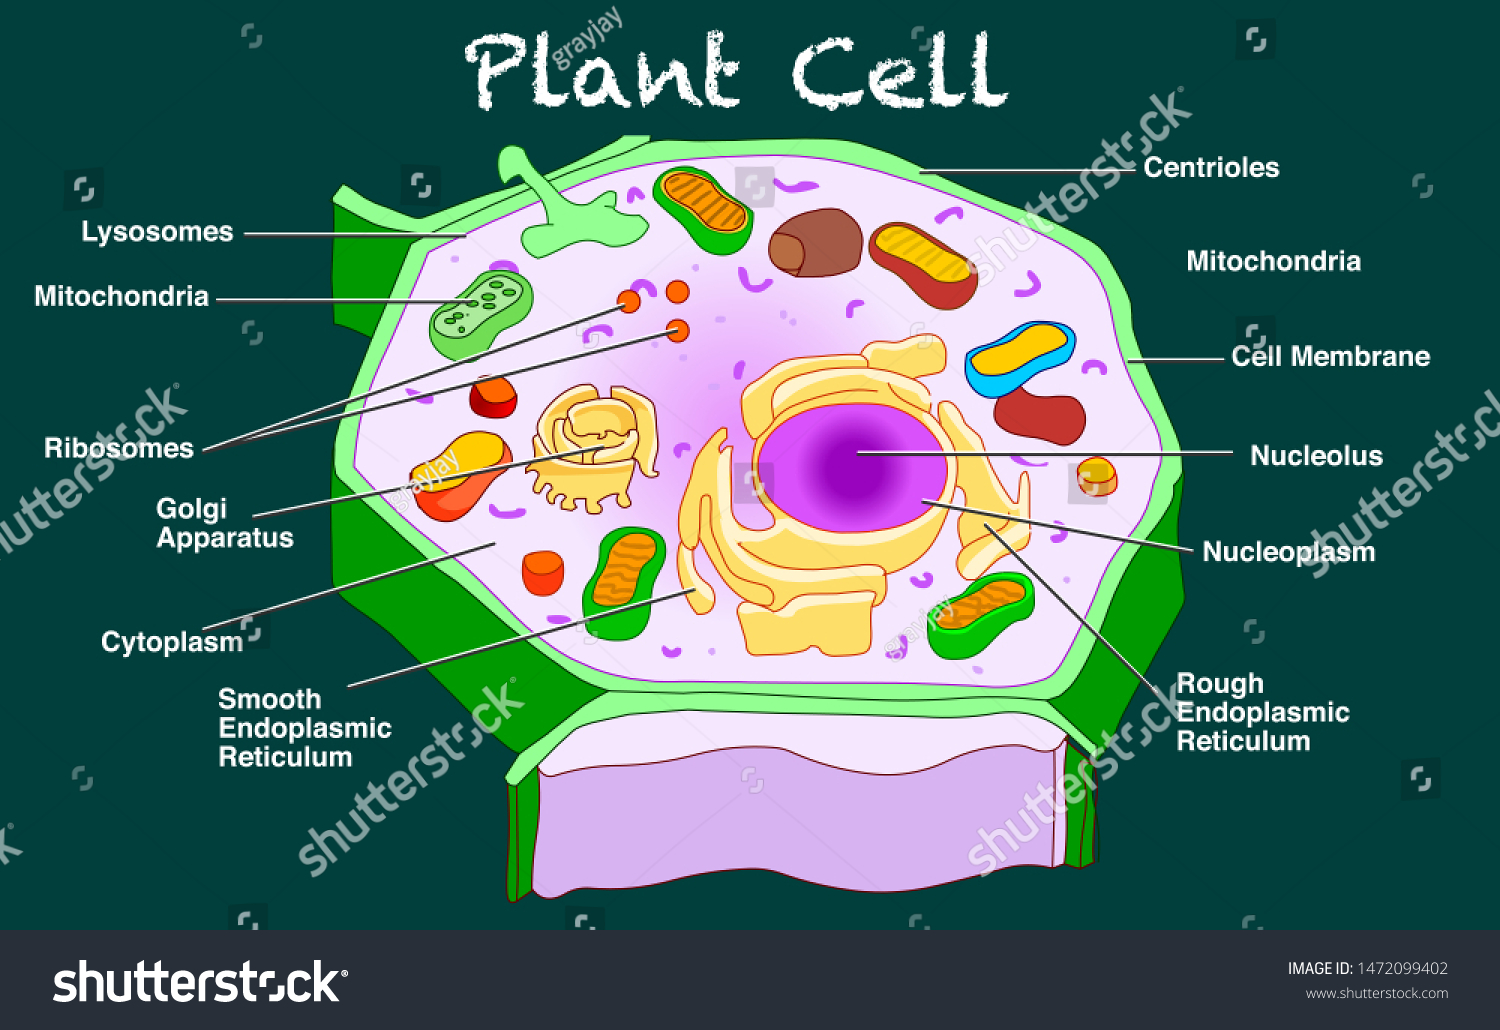 Plant Cell structure